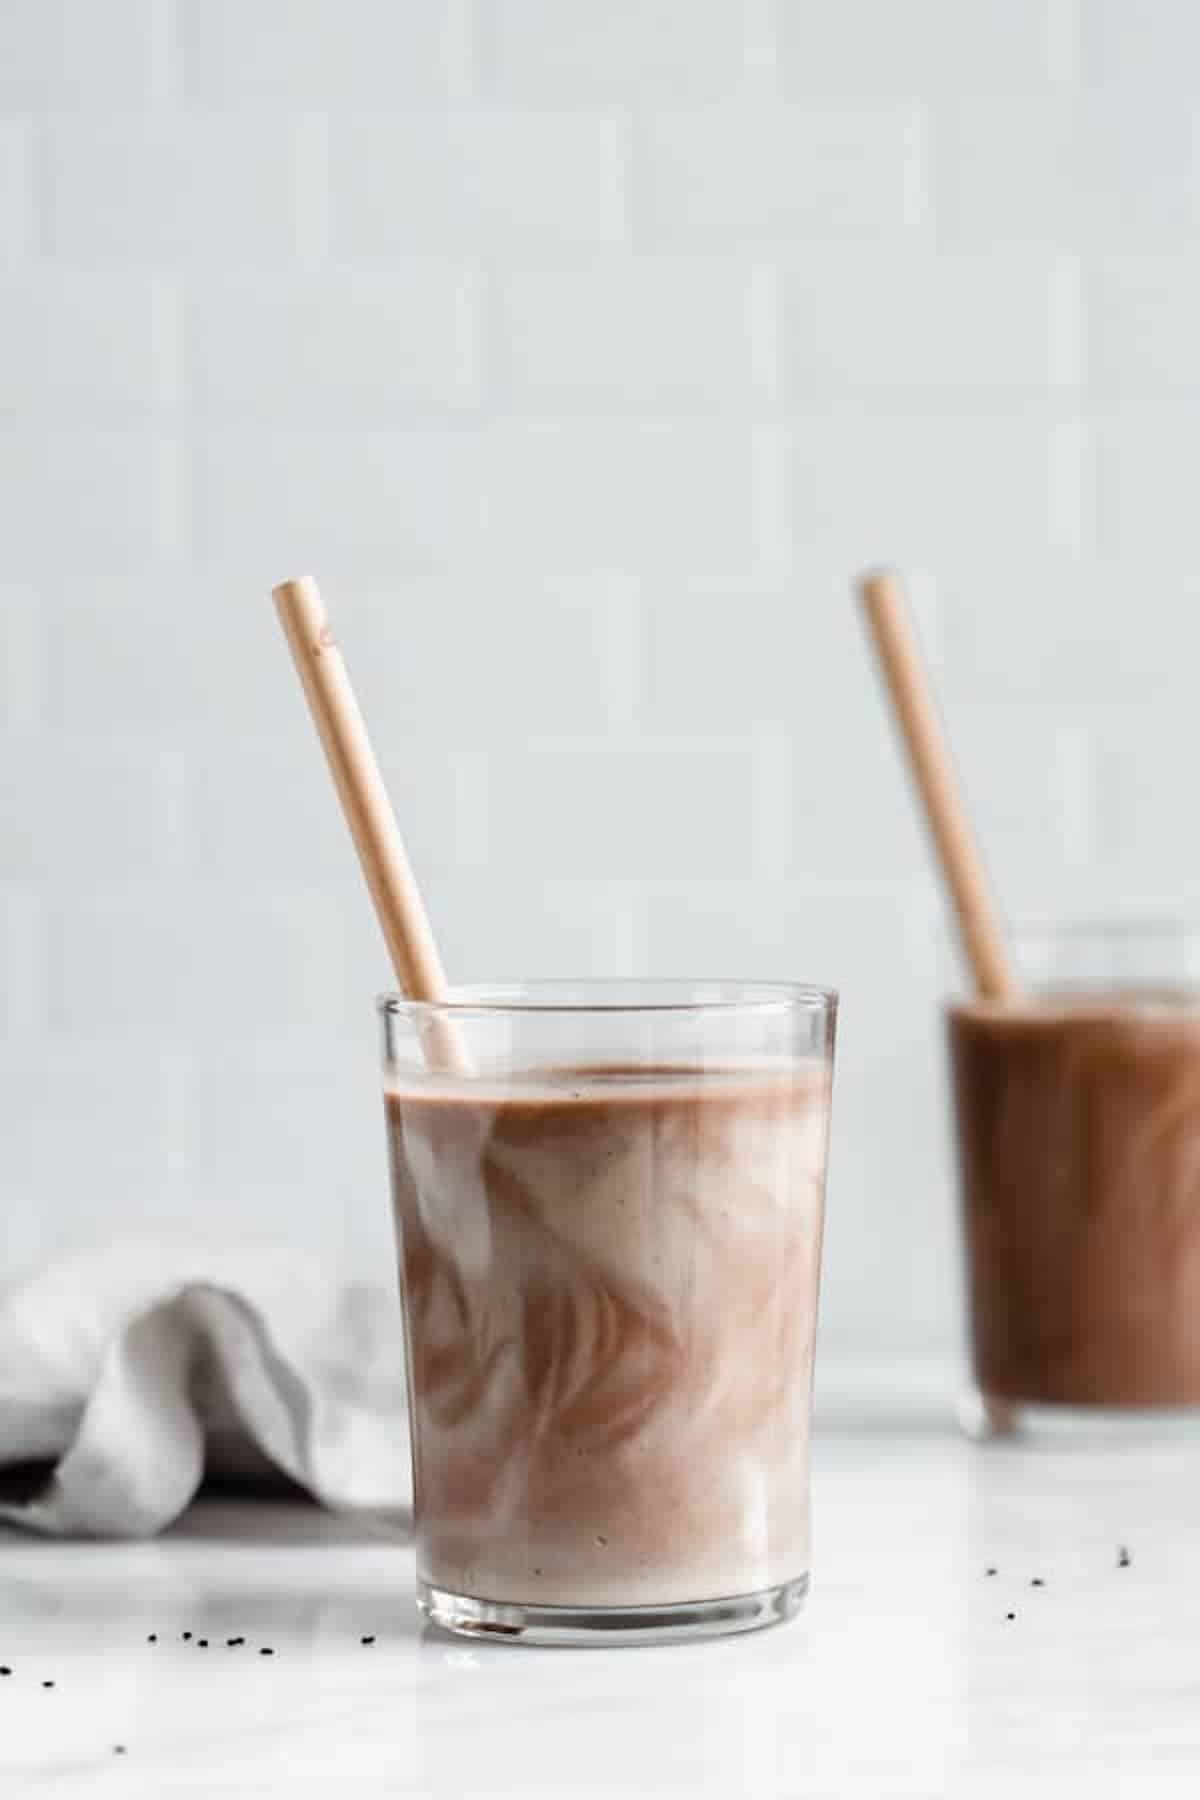 swirled chocolate shake in a clear glass with a brown paper straw against a white tile backdrop